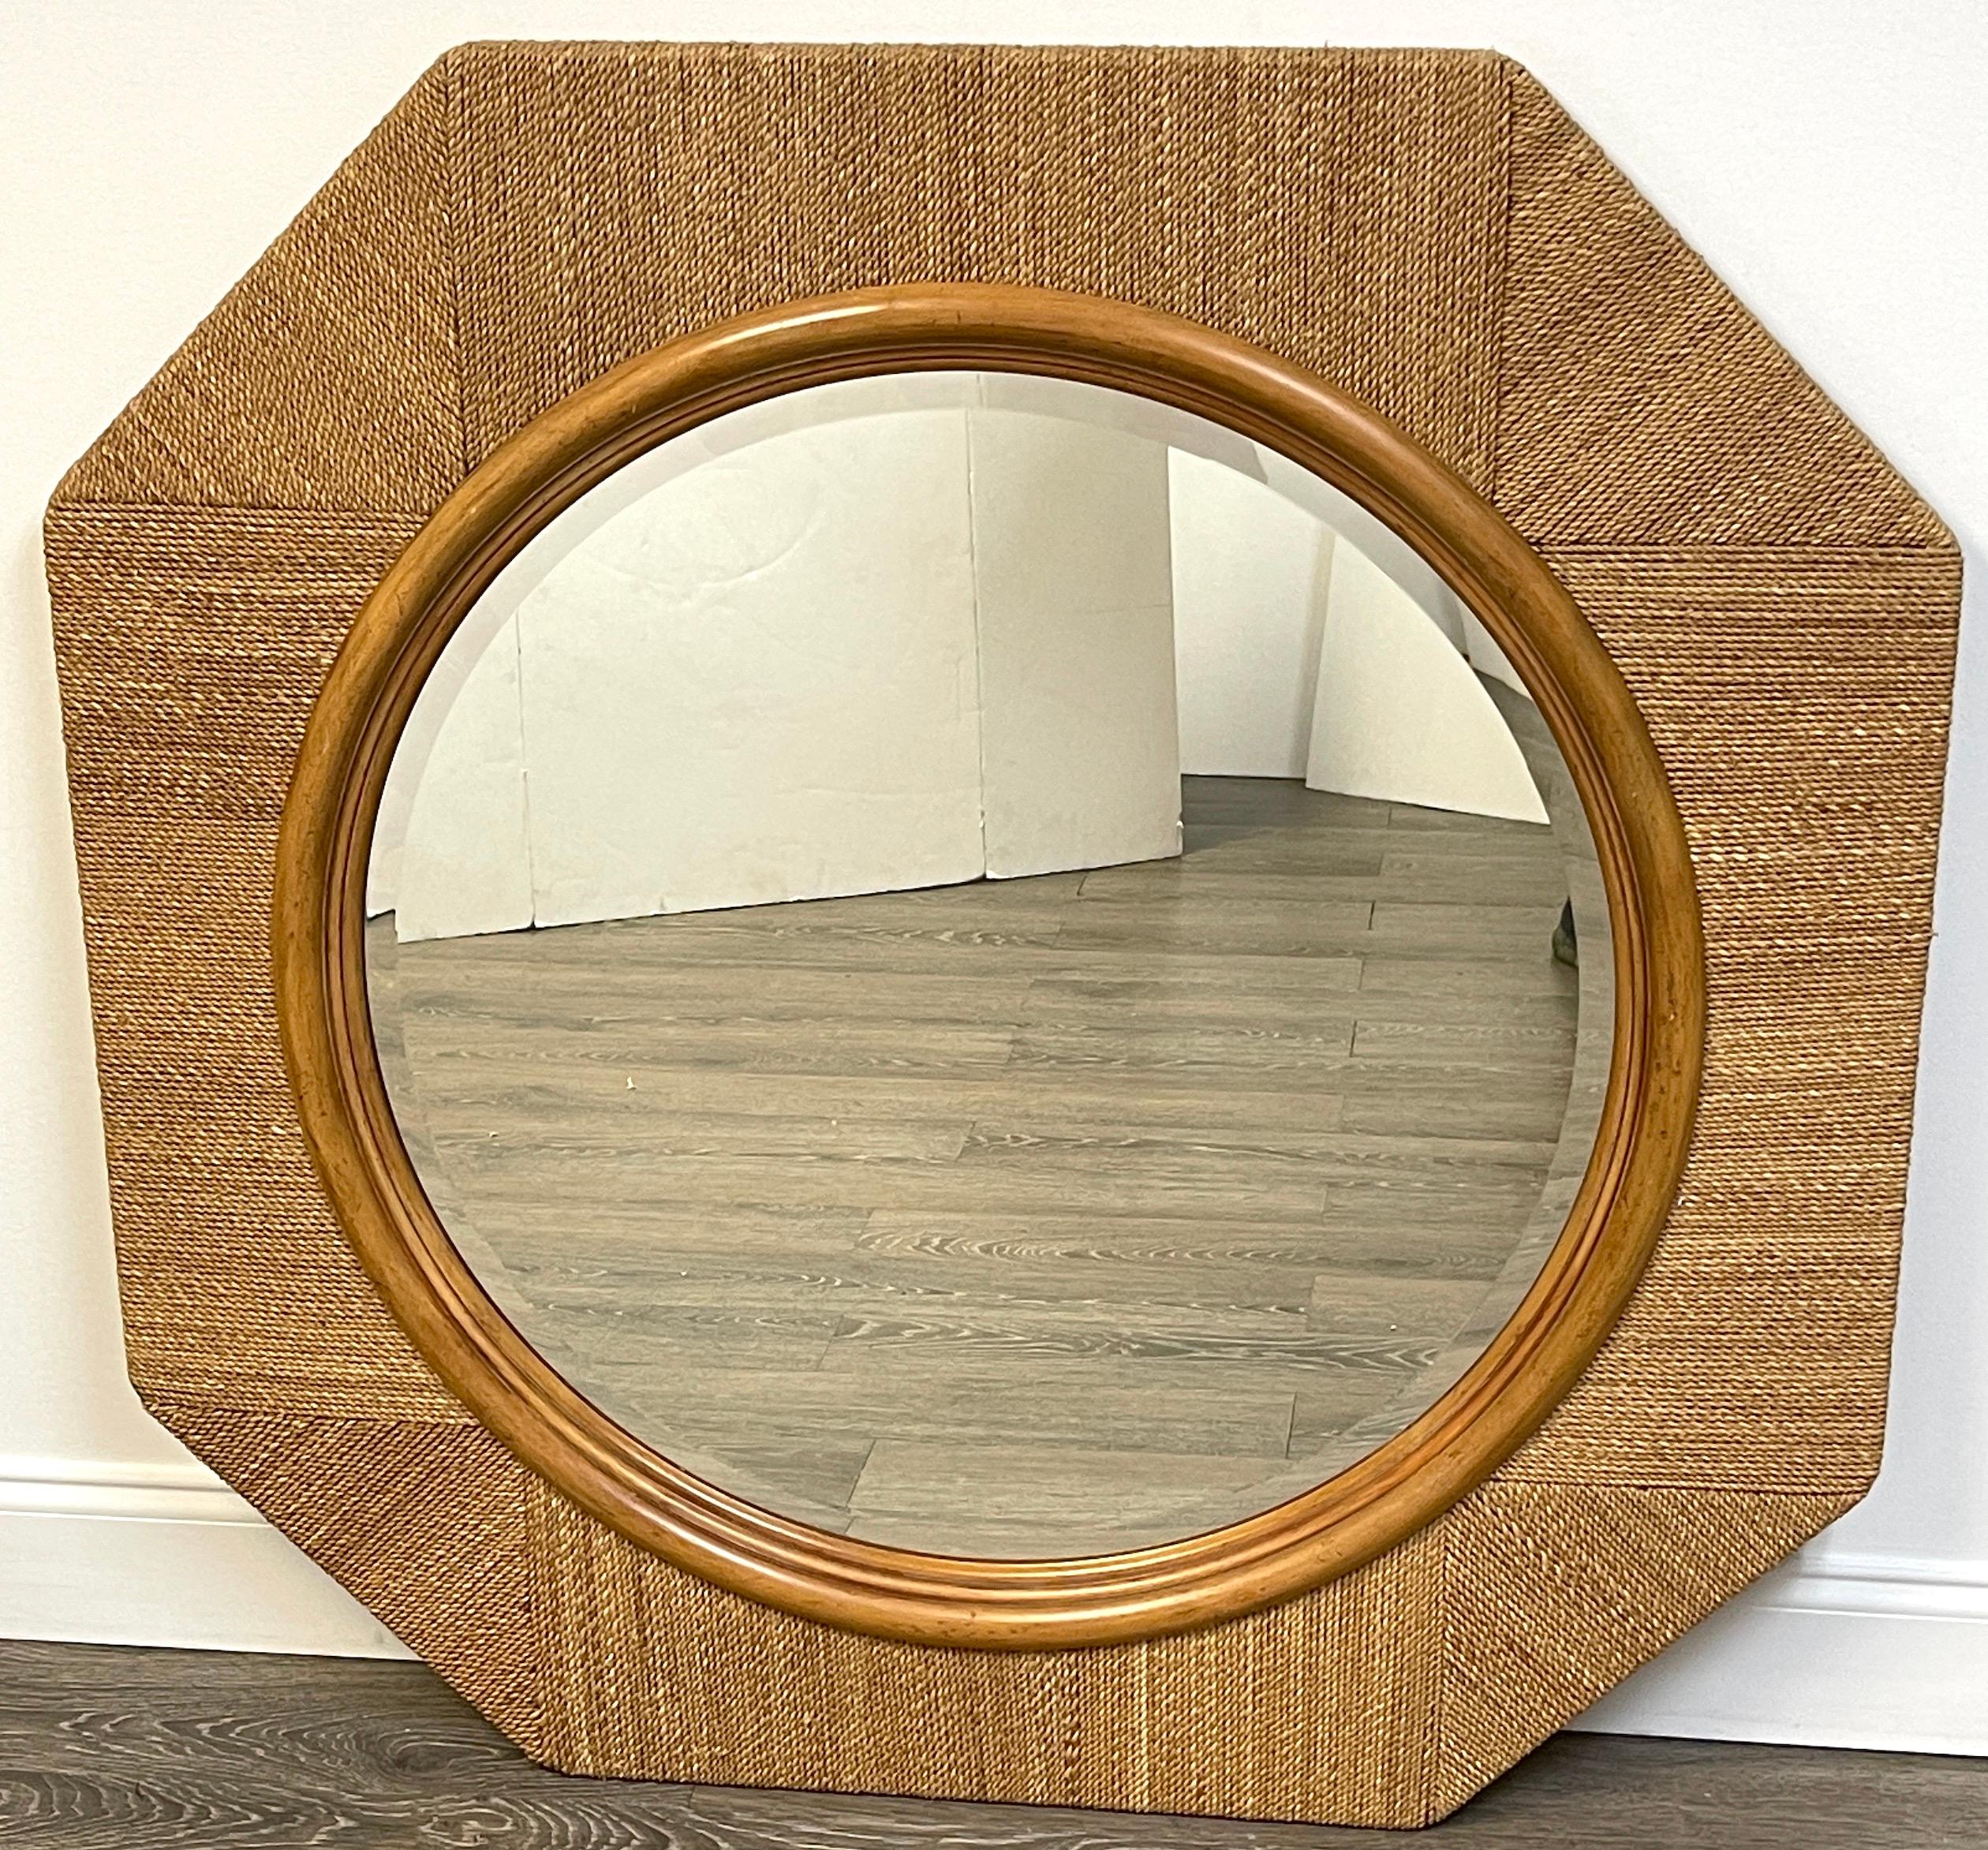 Organic modern woven rope octagonal porthole mirror. 
Well crafted, of good size 42-inches high x 43-inches wide, with an inset 29-inch diameter beveled mirror. Ready to place.
 